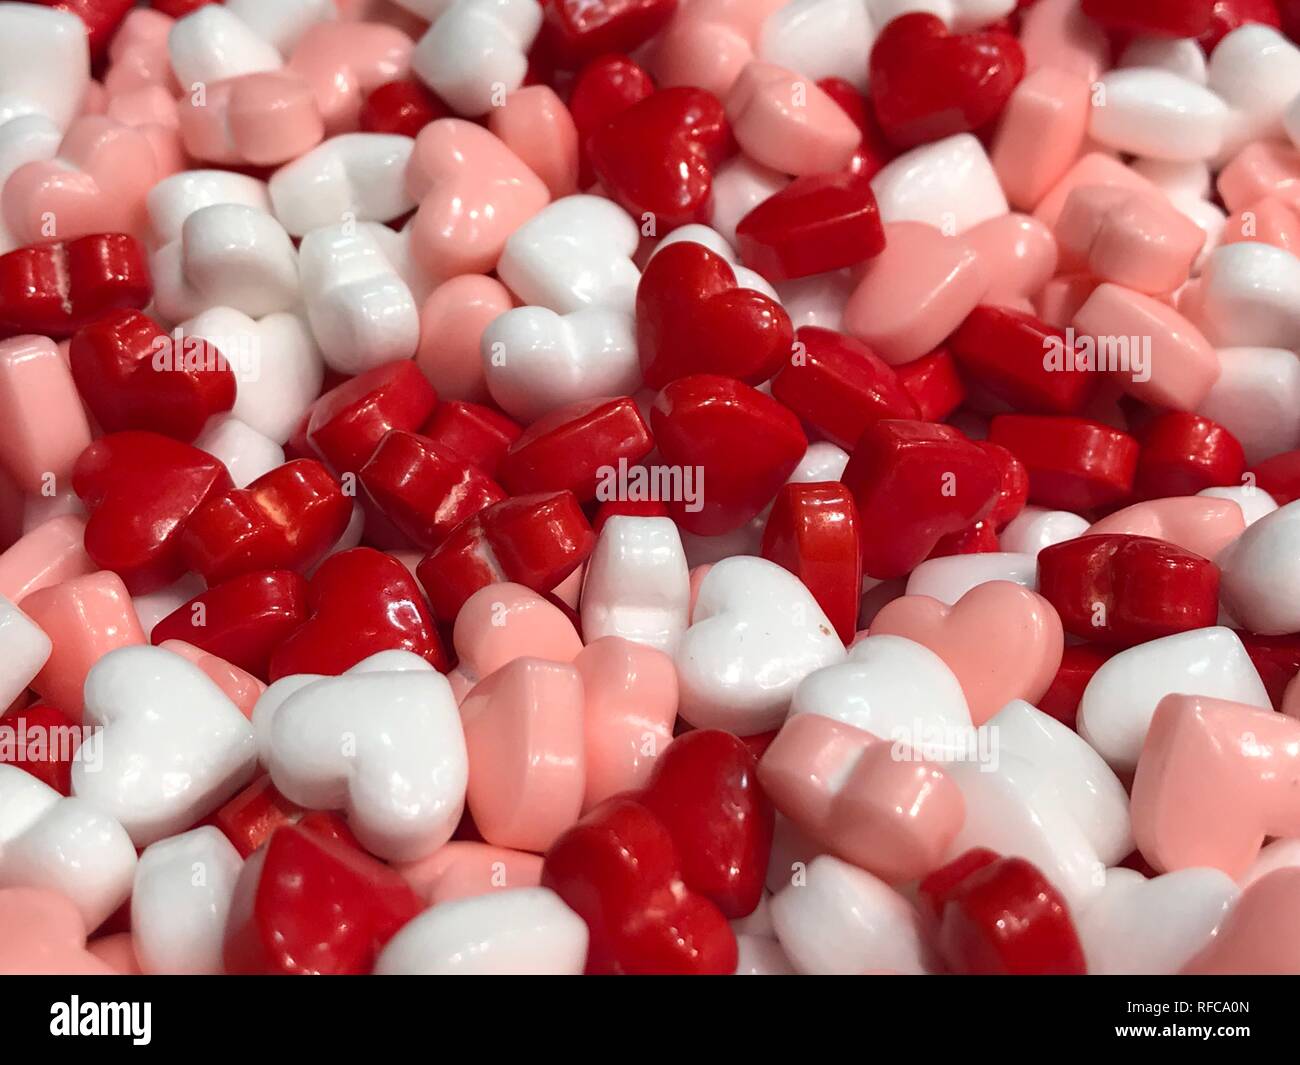 Hearts background love symbol lots of small sweet candies in a heart shape in white red and pink Stock Photo